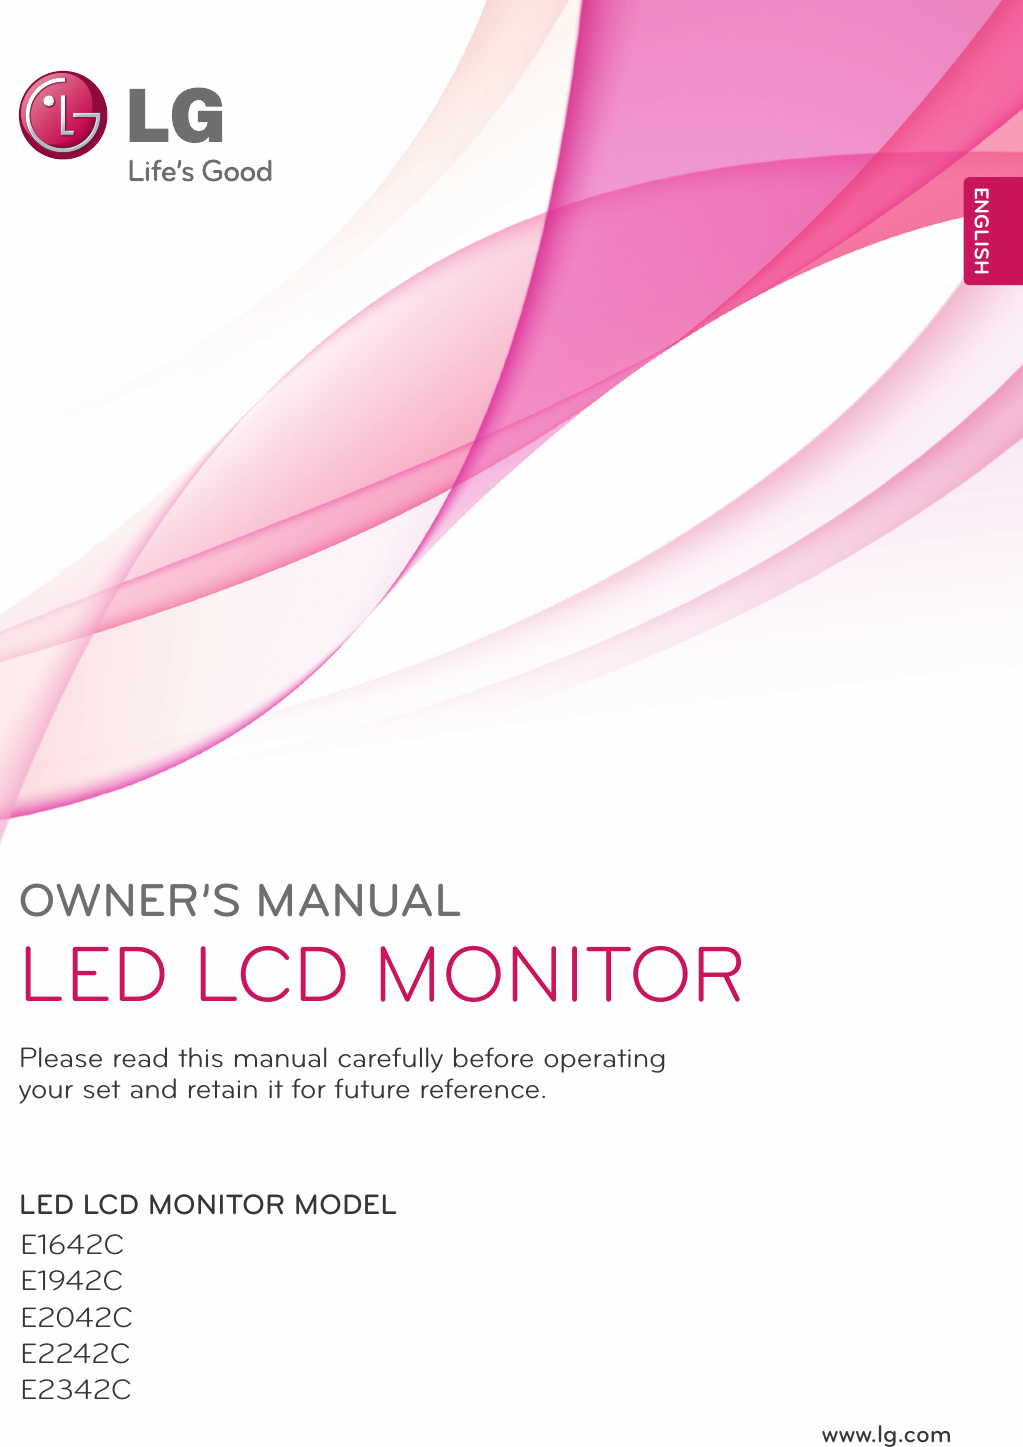 www.lg.comOWNER’S MANUALLED LCD MONITORE1642CE1942CE2042CE2242CE2342CPlease read this manual carefully before operating your set and retain it for future reference.LED LCD MONITOR MODELENGLISH